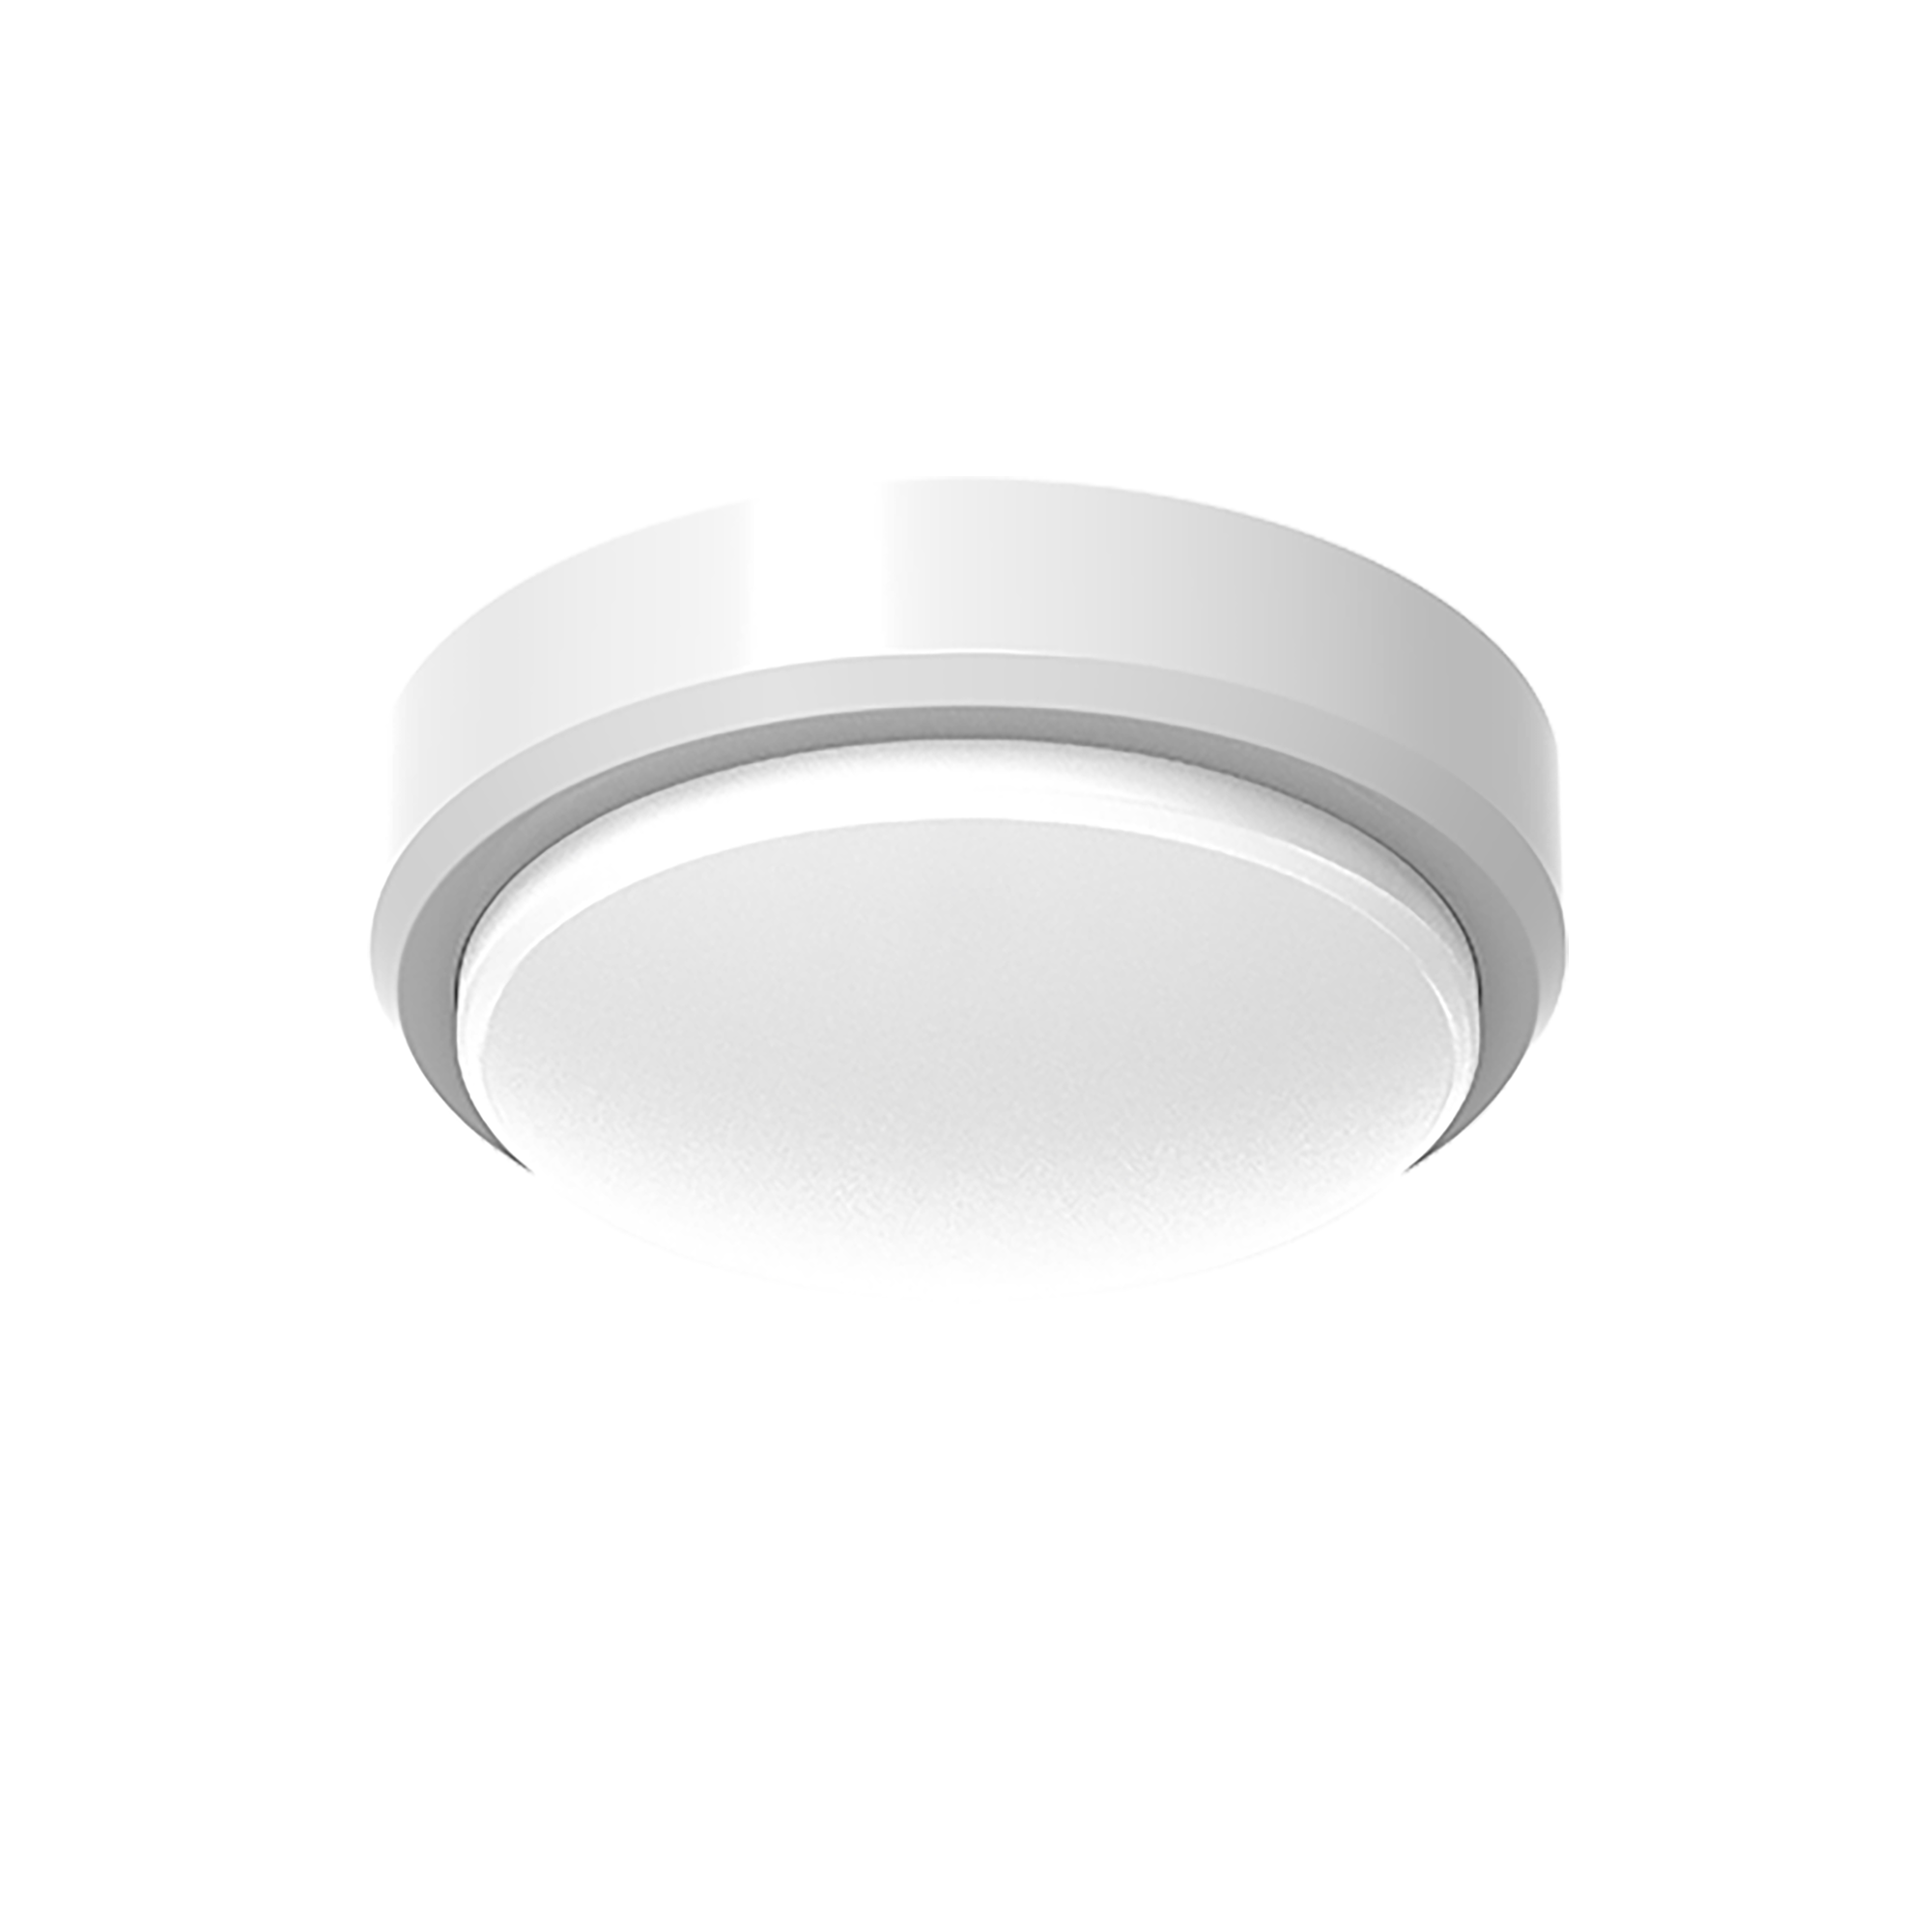 Fire Safety Emergency Exit LED Lighting Fixture with Fire-Rated, Code-Compliant, Fire-Resistant, Battery Backup, and Regulations-Compliant Features